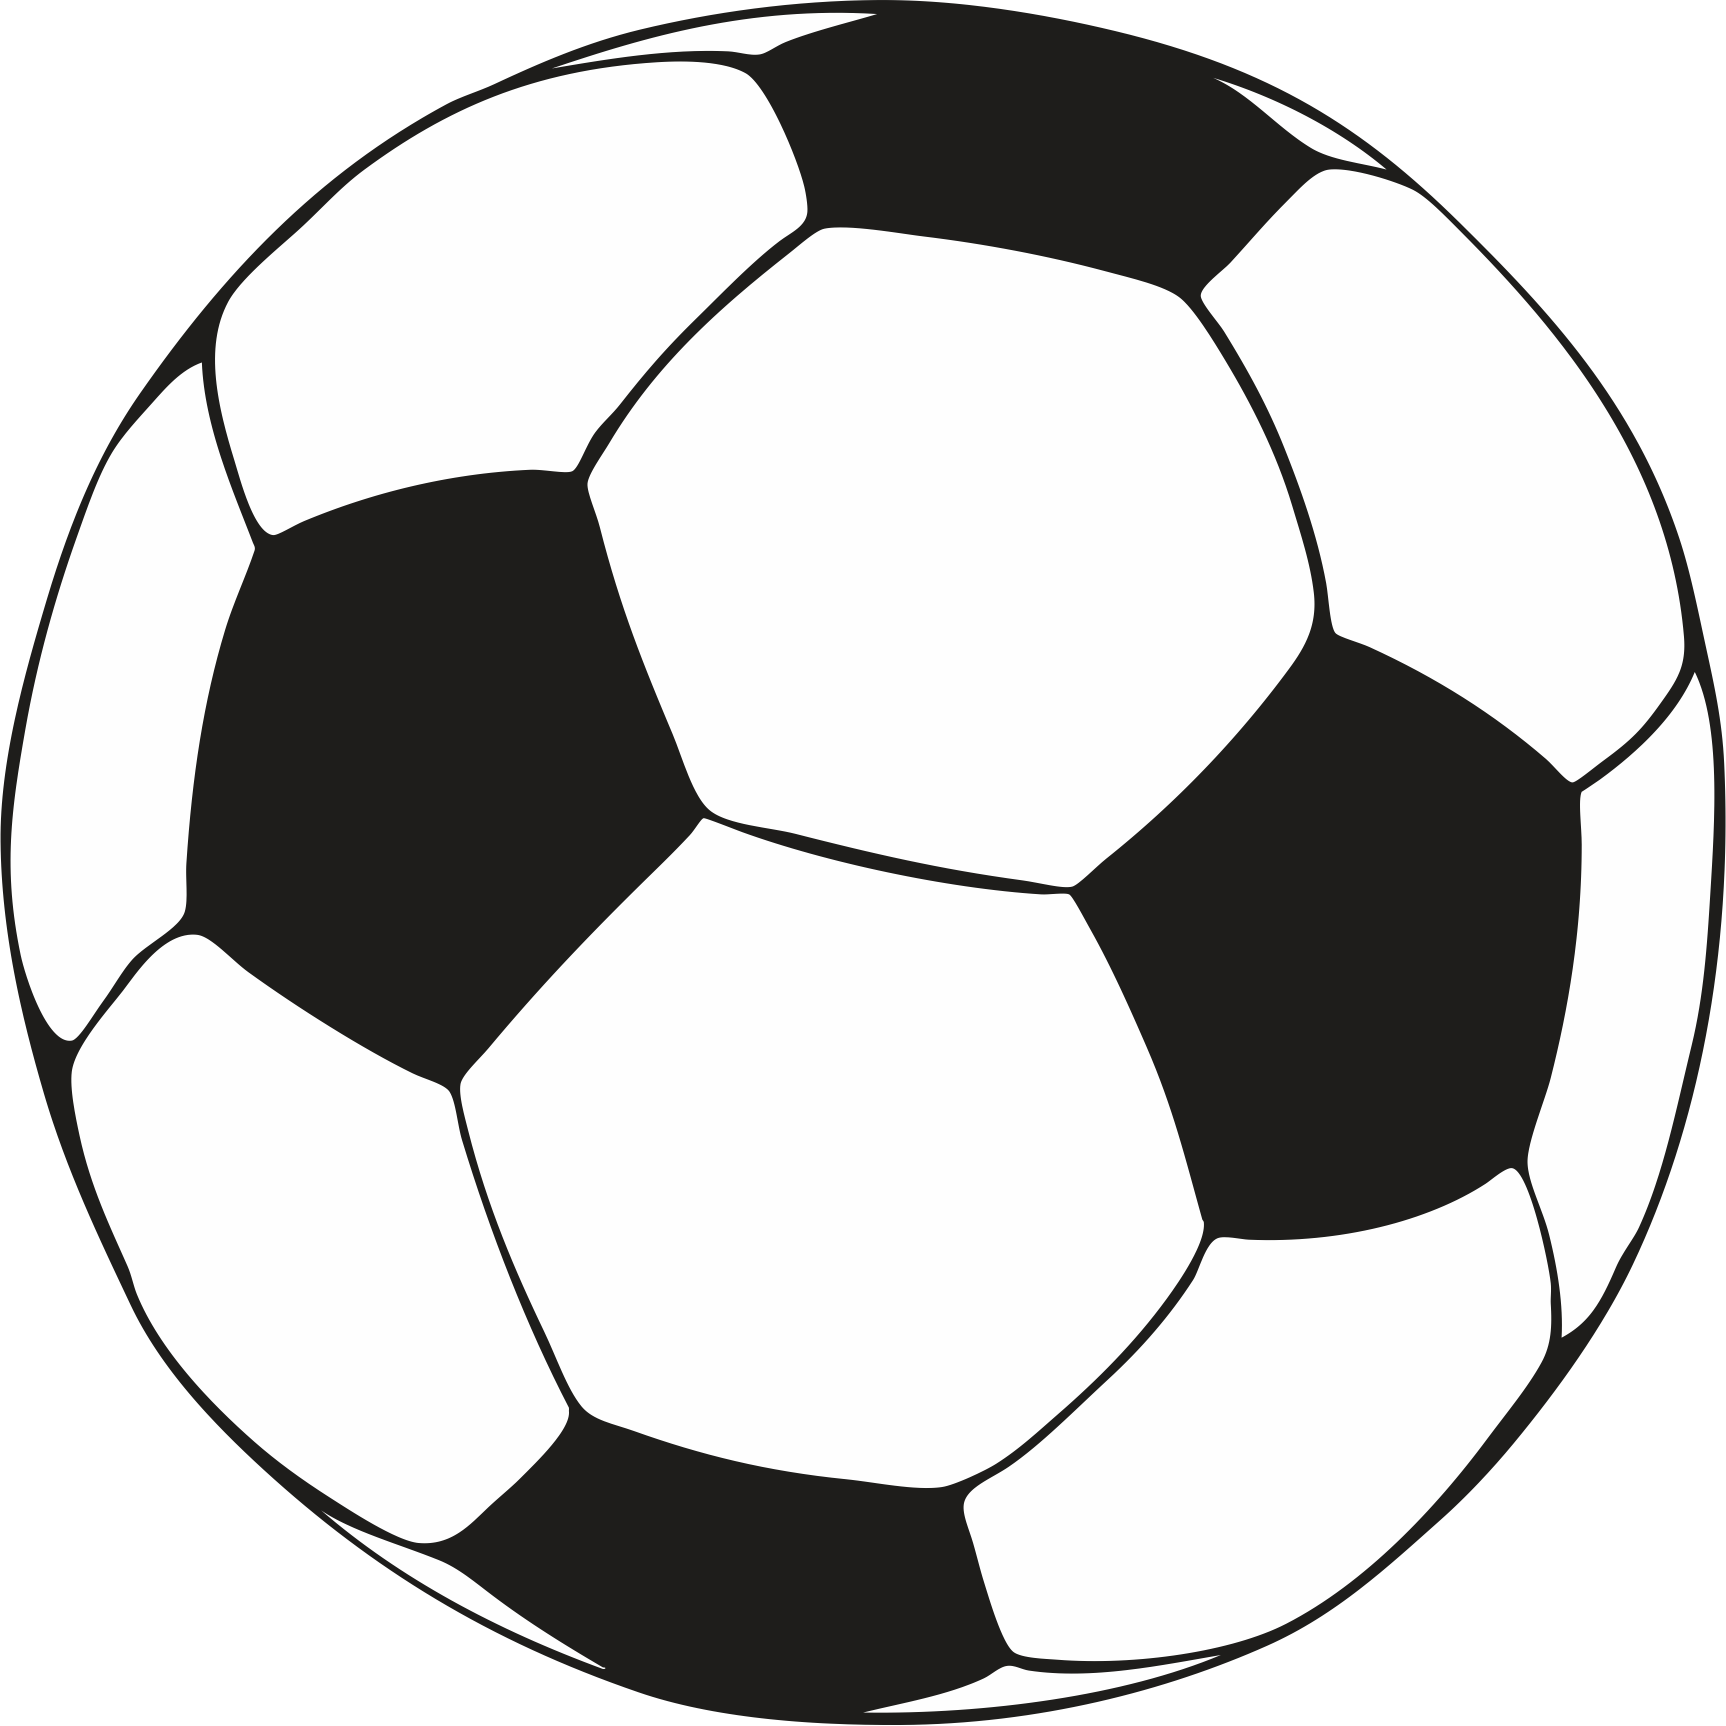 Soccer ball football ball images clipart clipartcow